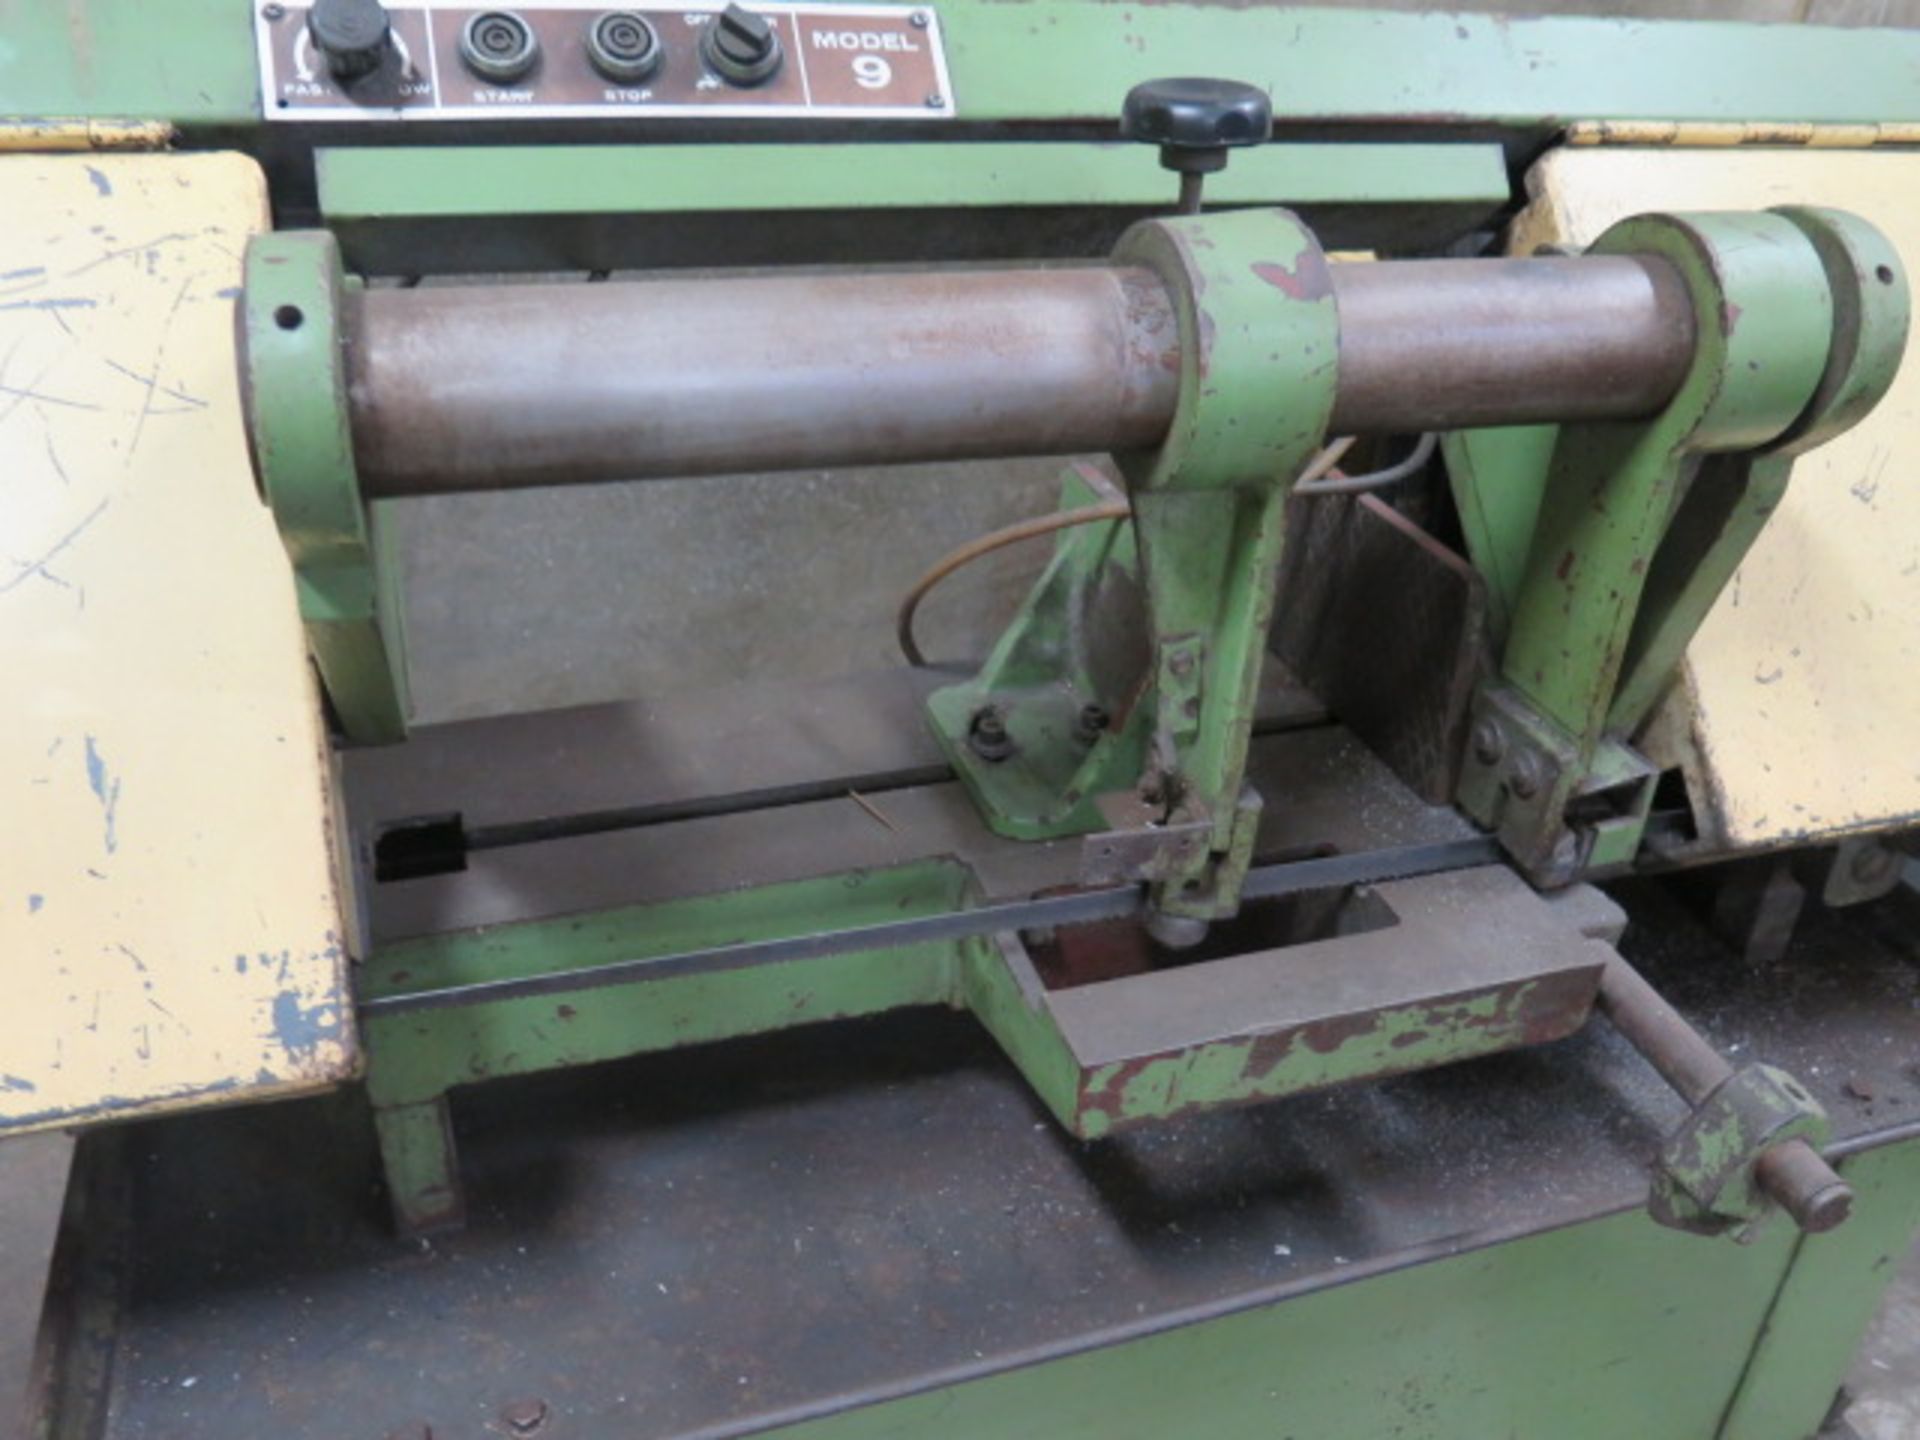 Import mdl. 9 9” Horizontal Band Saw (SOLD AS-IS - NO WARRANTY) - Image 3 of 7